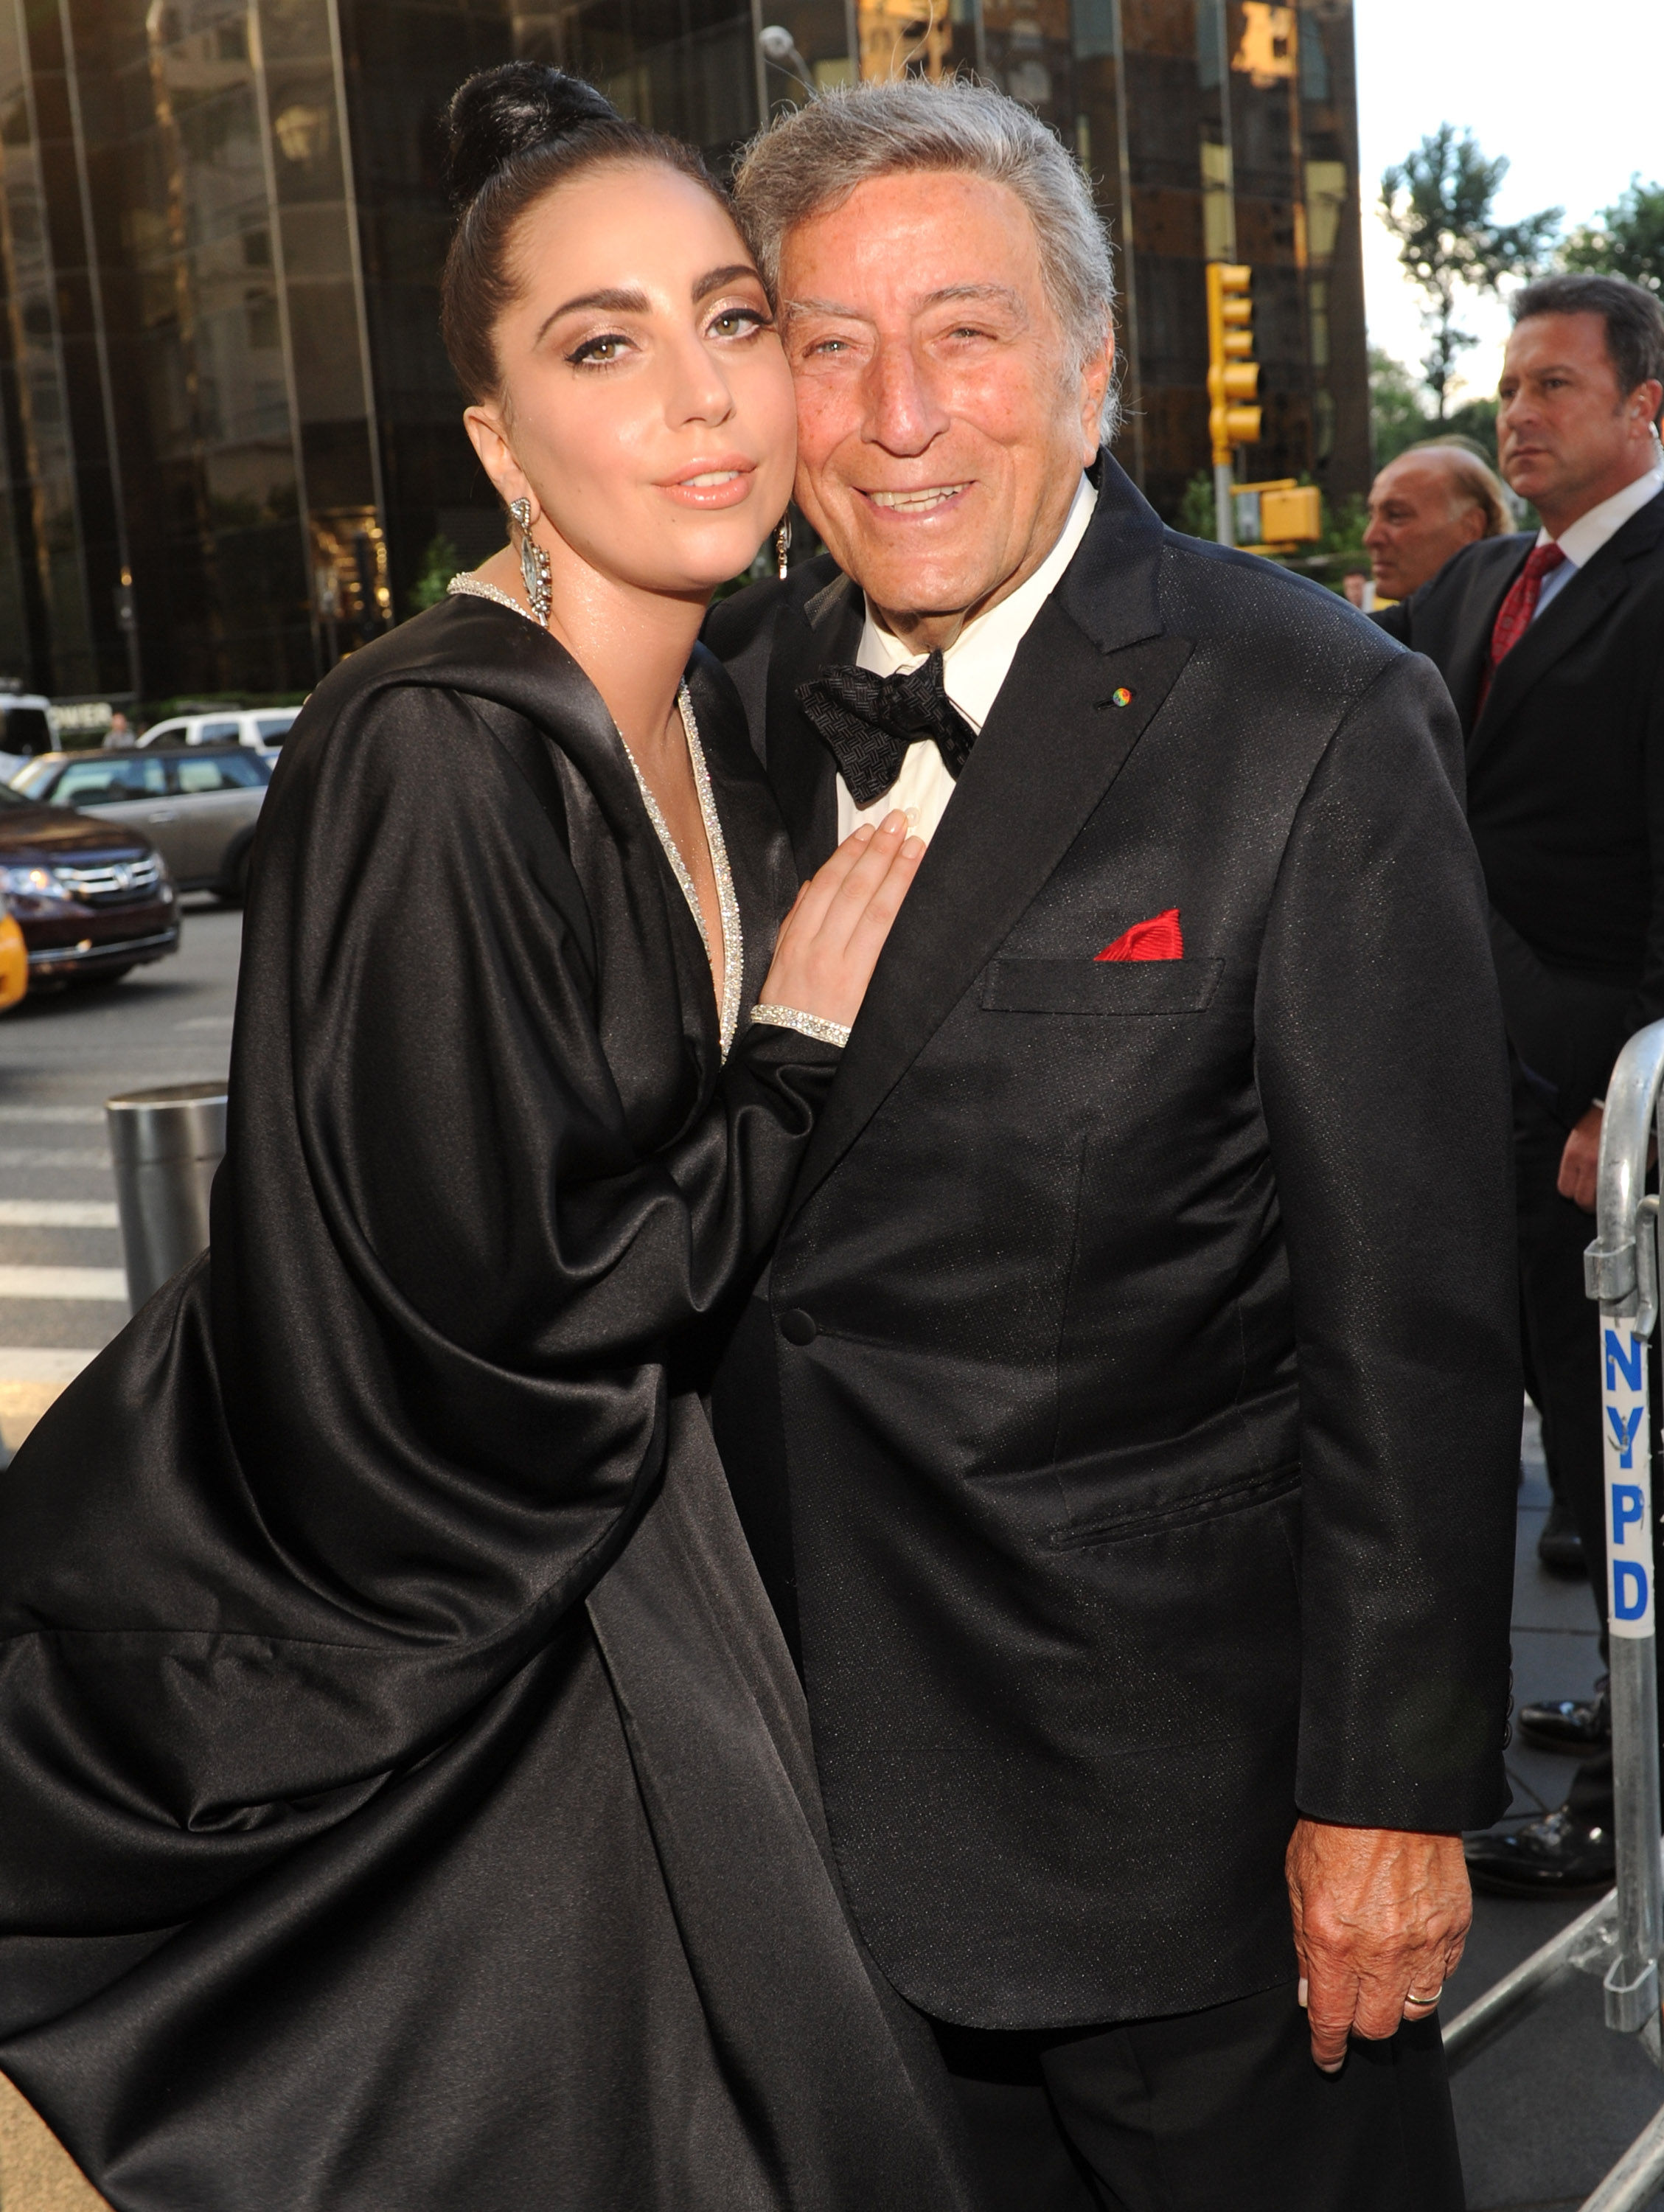 Tony Bennett and Lady Gaga arrive to their "Cheek To Cheek" taping at Jazz at Lincoln Center on July 28, 2014 in New York City.